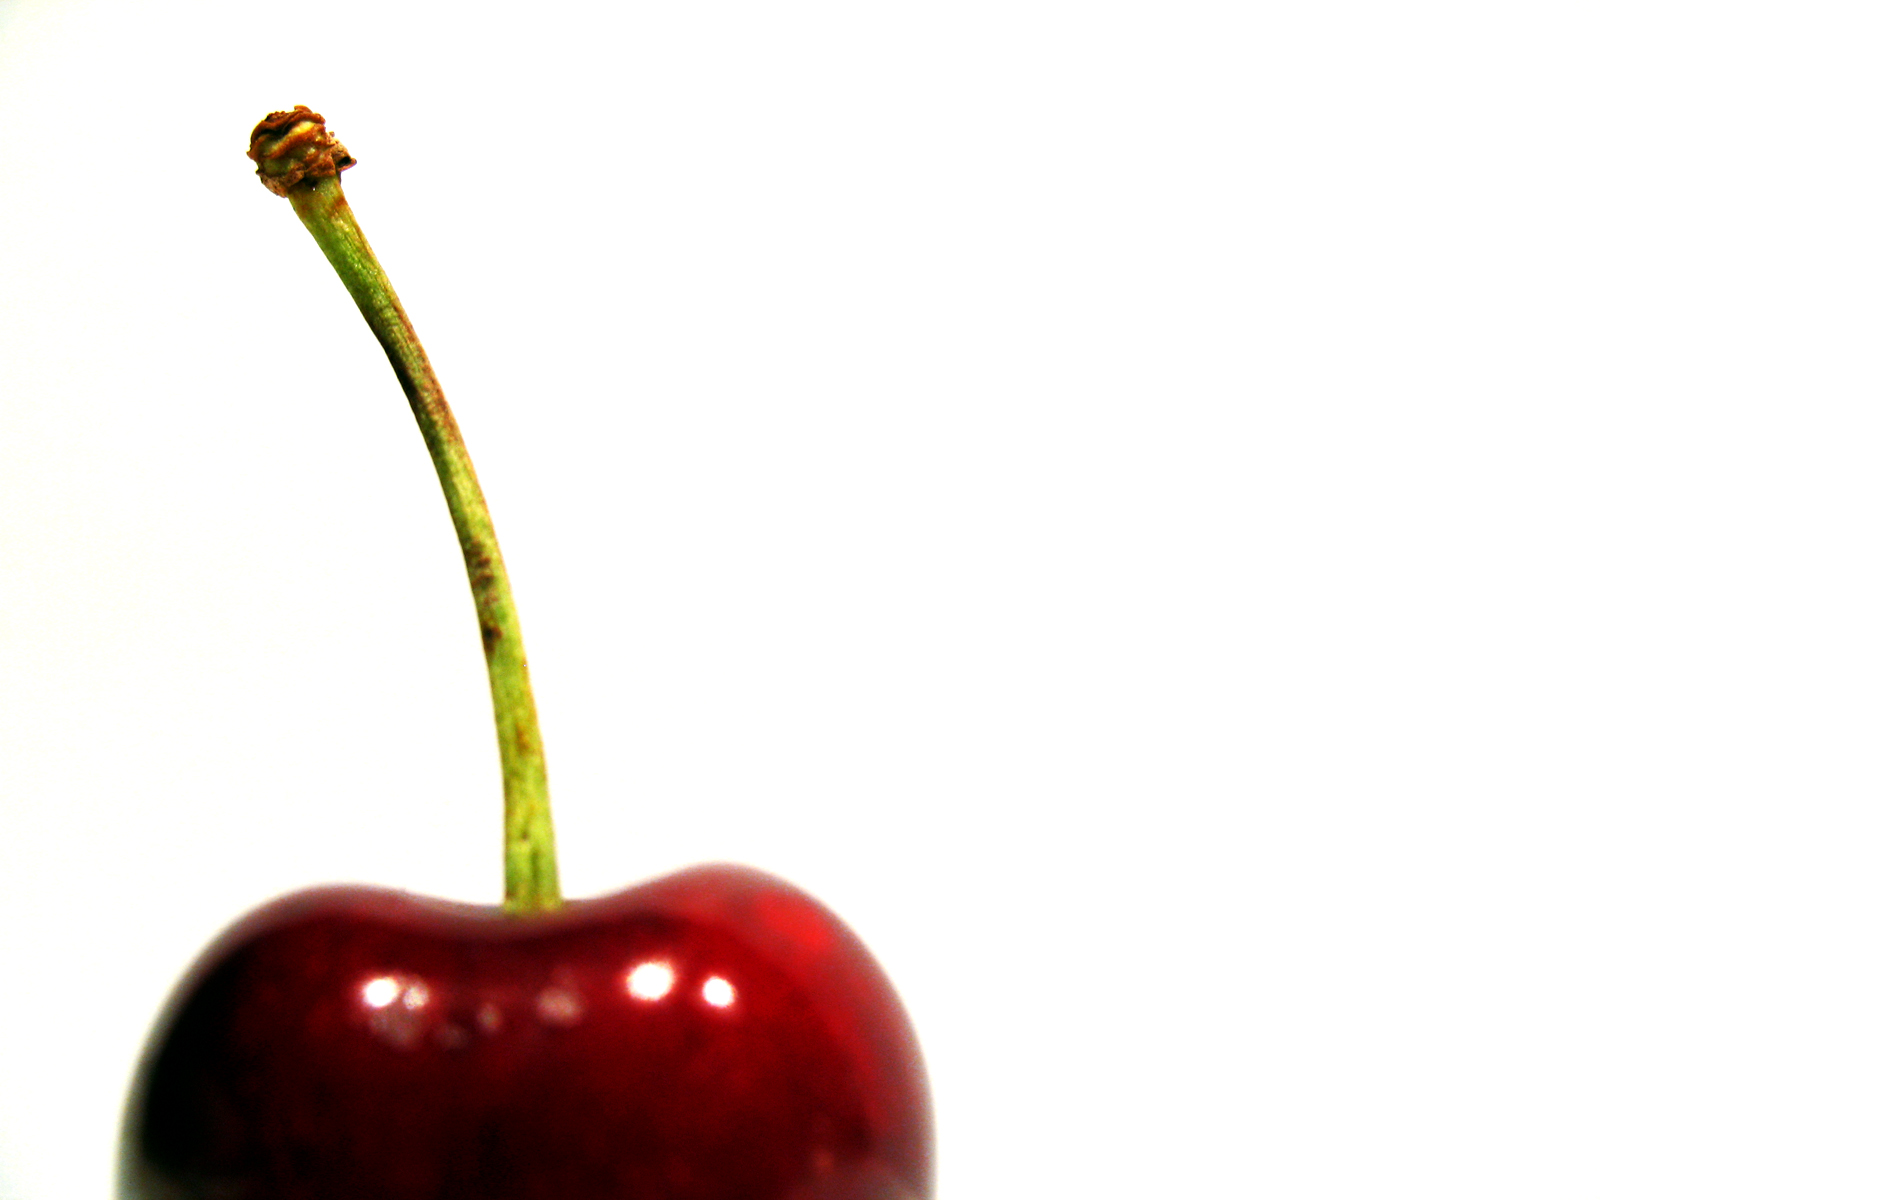 focused attention on cherry | wallpapers55.com - Best Wallpapers ...